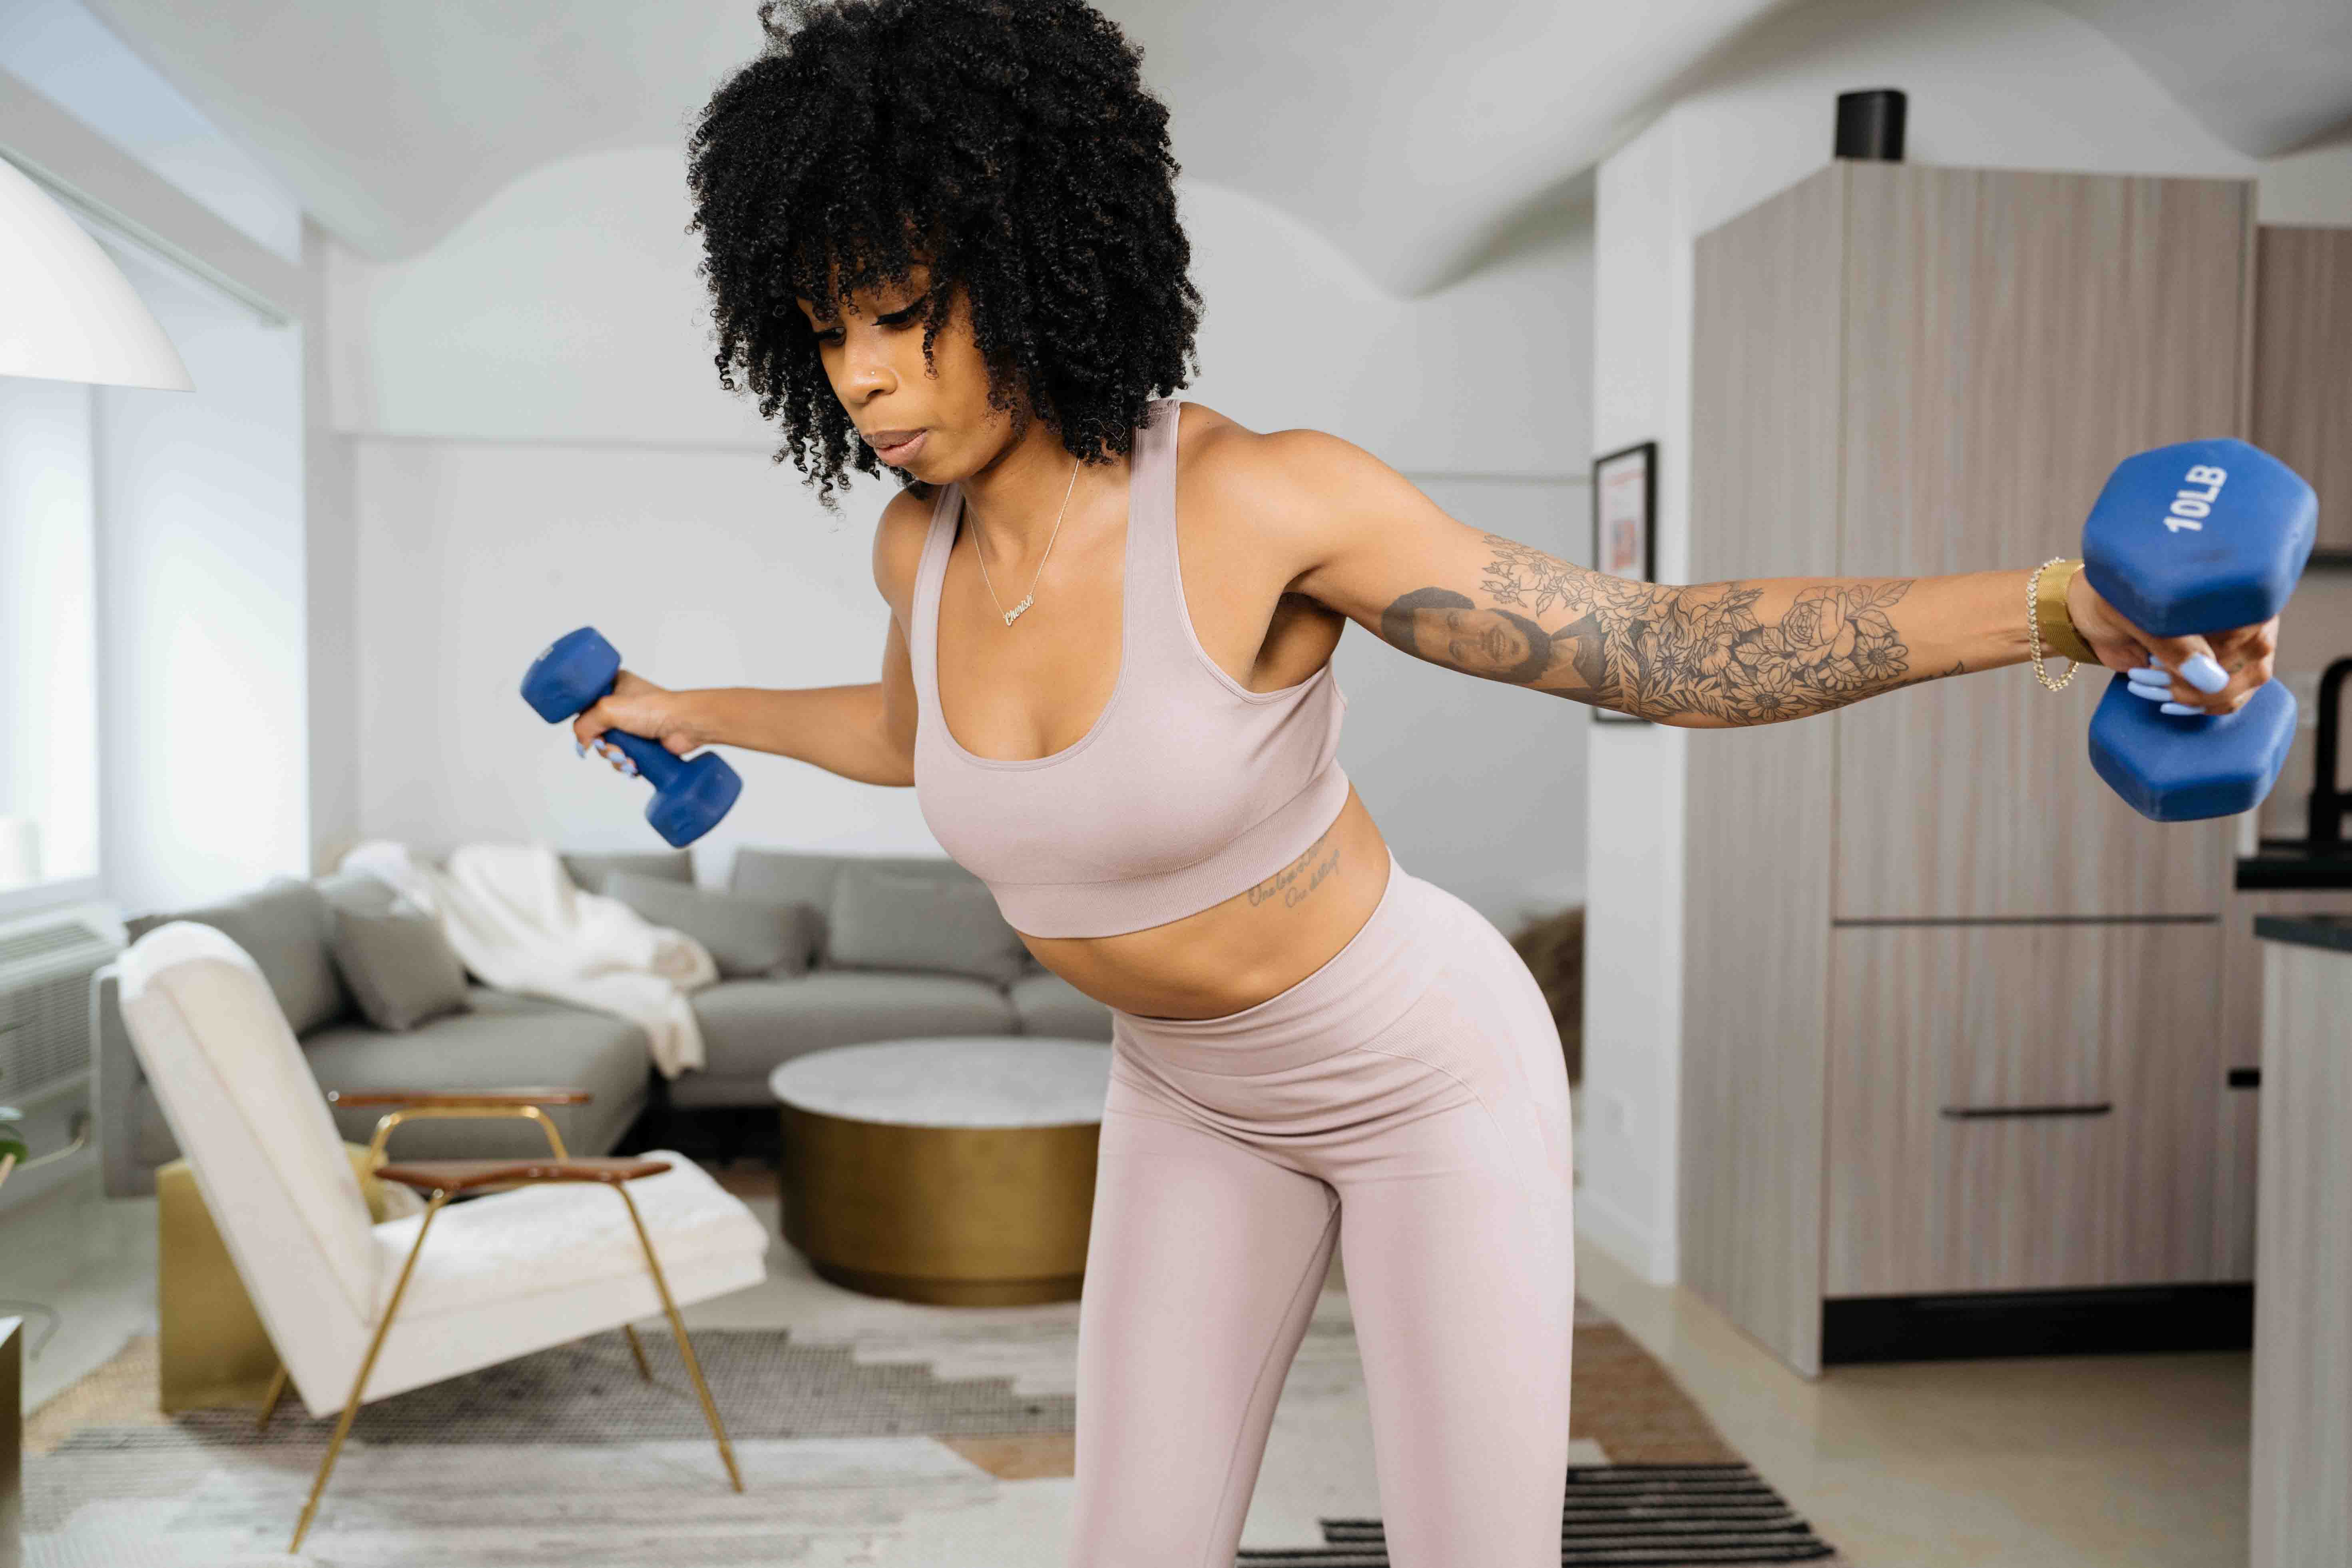 woman with dark curly hair wearing a light pink/purple sports bra with matching leggings, holding two ten pound weights outward from her body in a living room setting